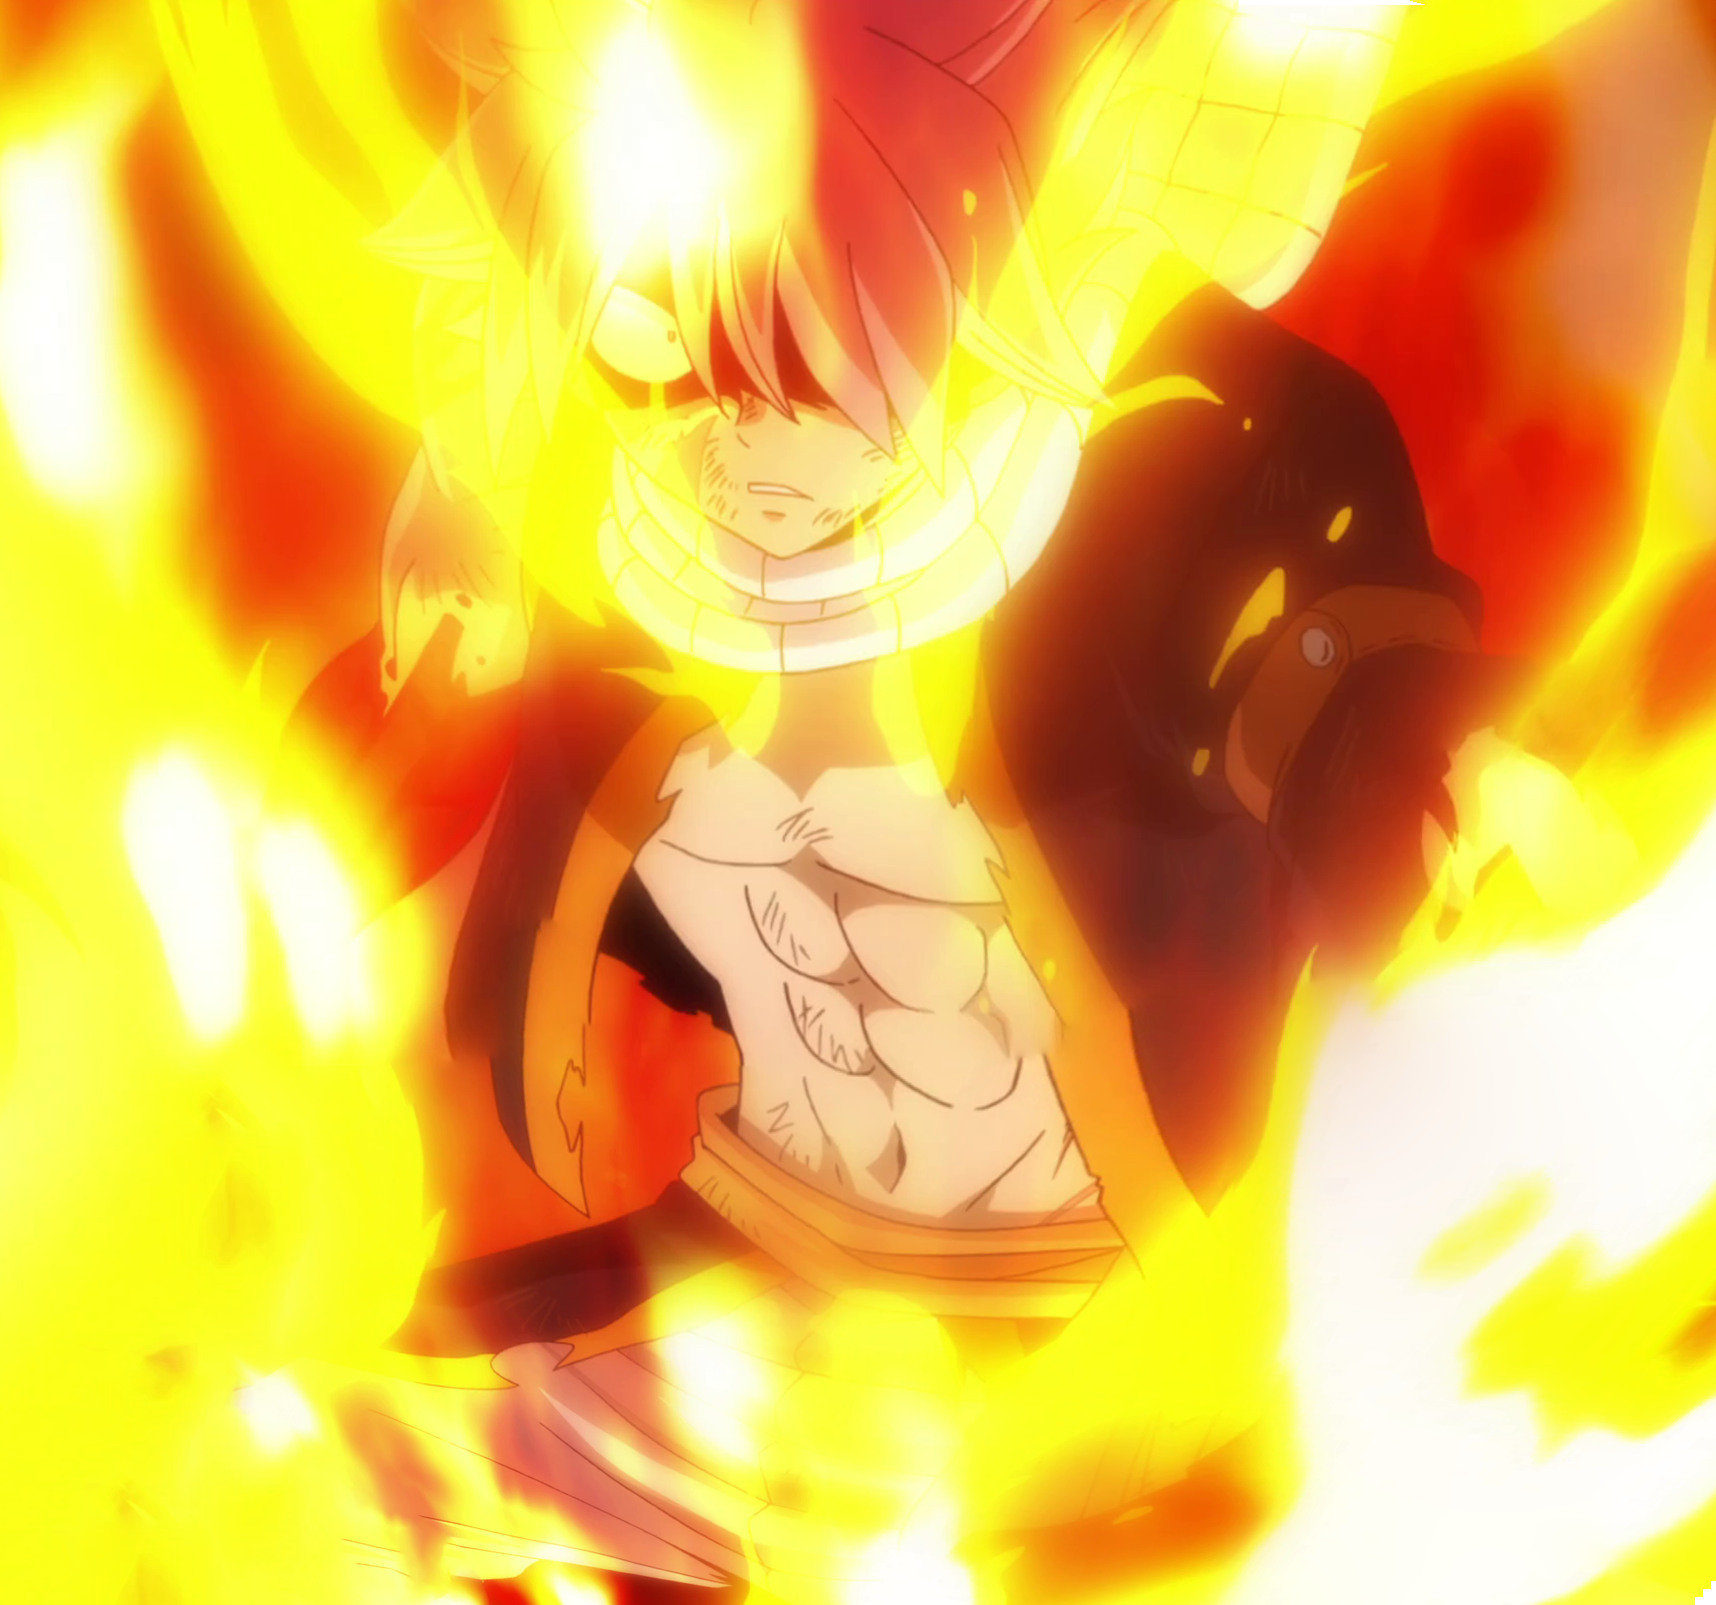 This first trailer for the Fire Force anime has flame demons and combat  magician fire-fighters duking it out